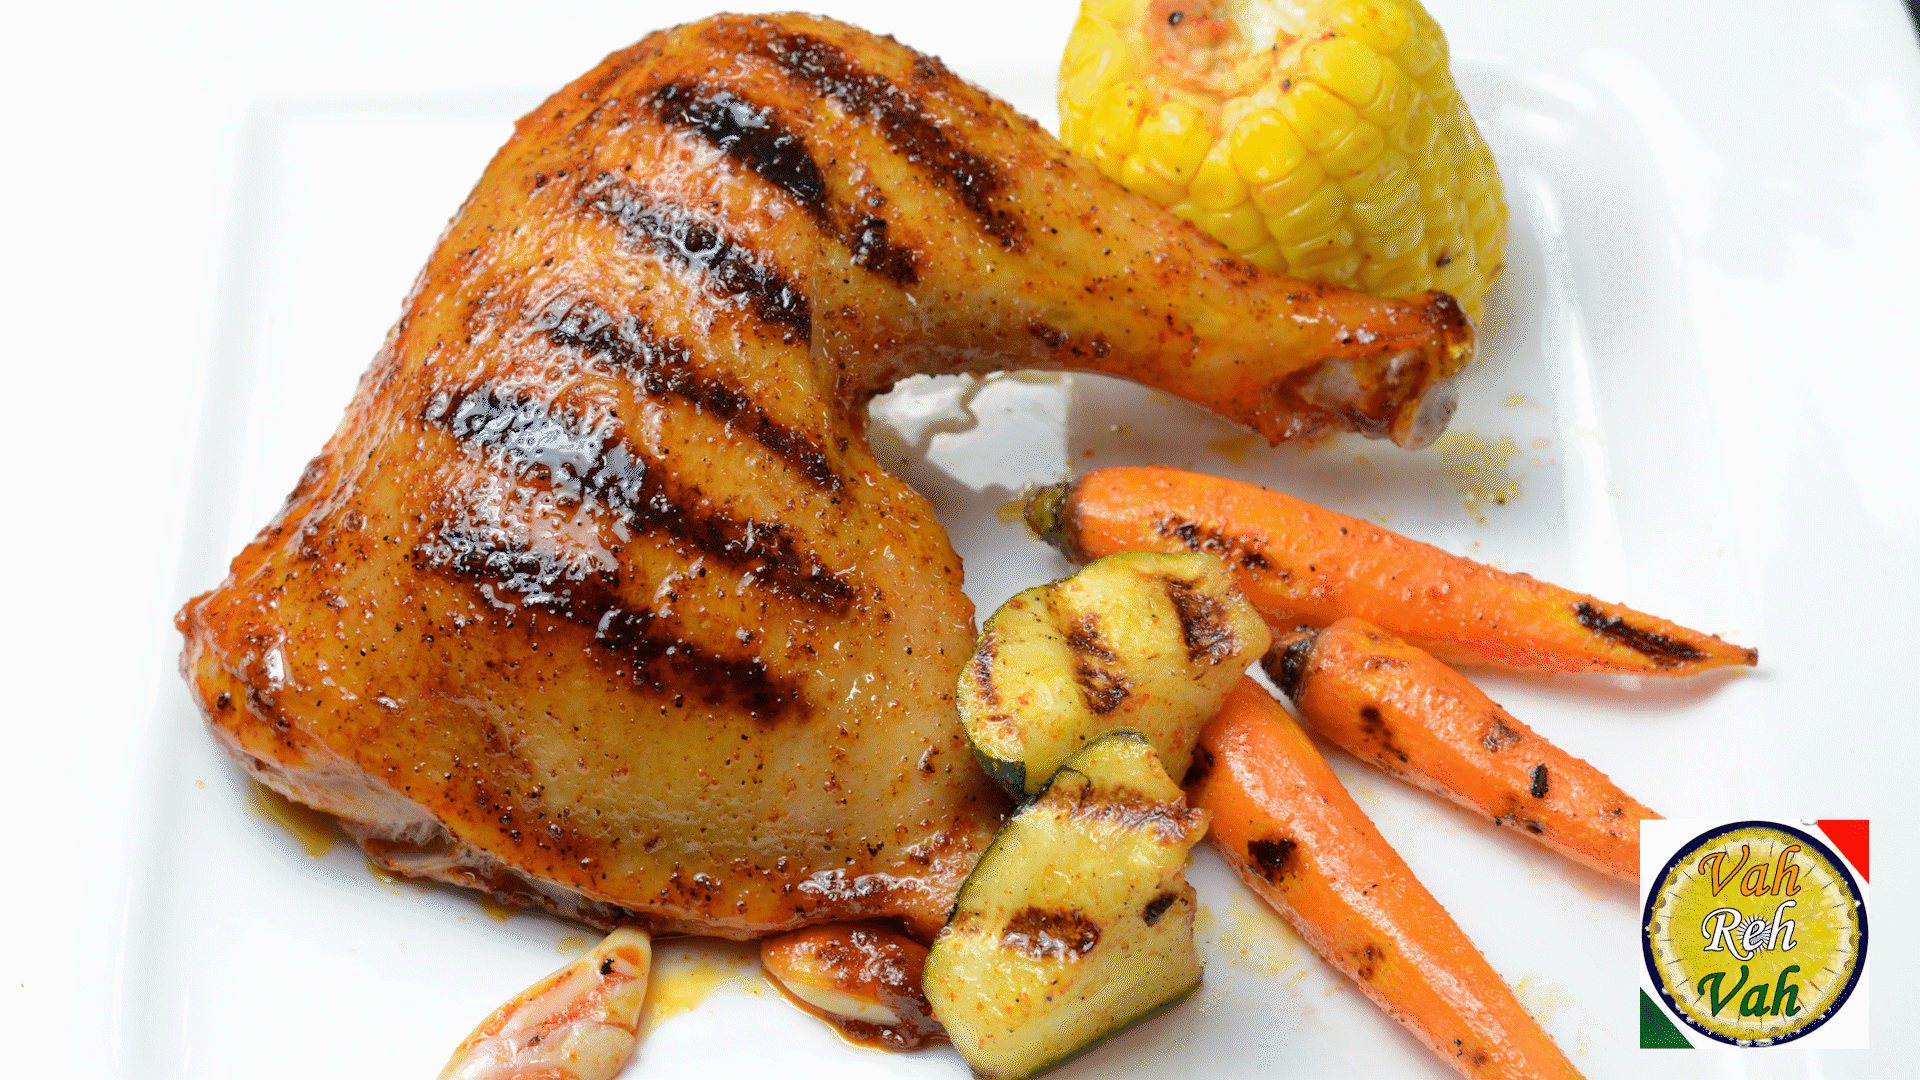 Oven Roasted Chicken Legs recipe, Spicy Roasted